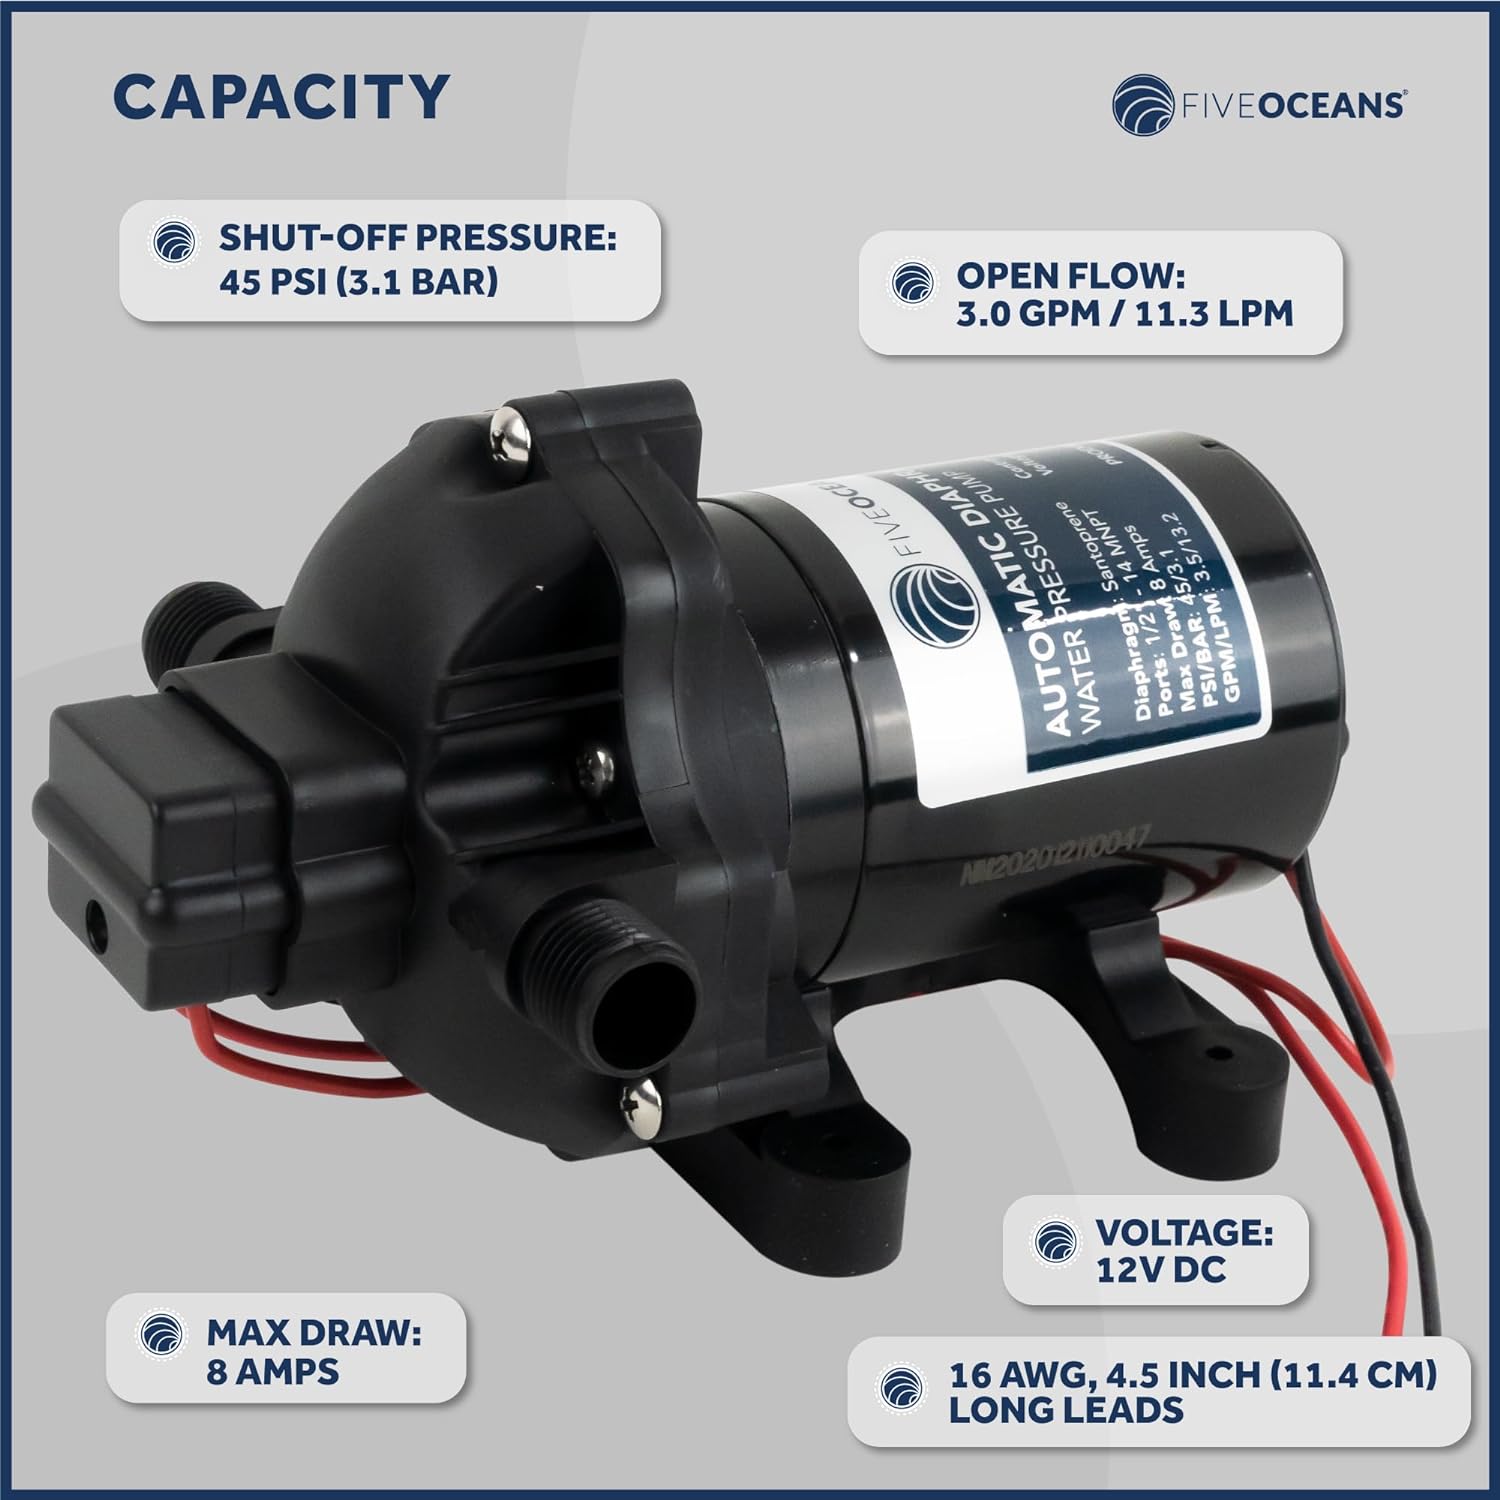 12 volts Automatic Diaphragm Water Pressure Pump, Up to 45PSI / 3.0 GPM, Self-Priming, Run Dry Safe-3